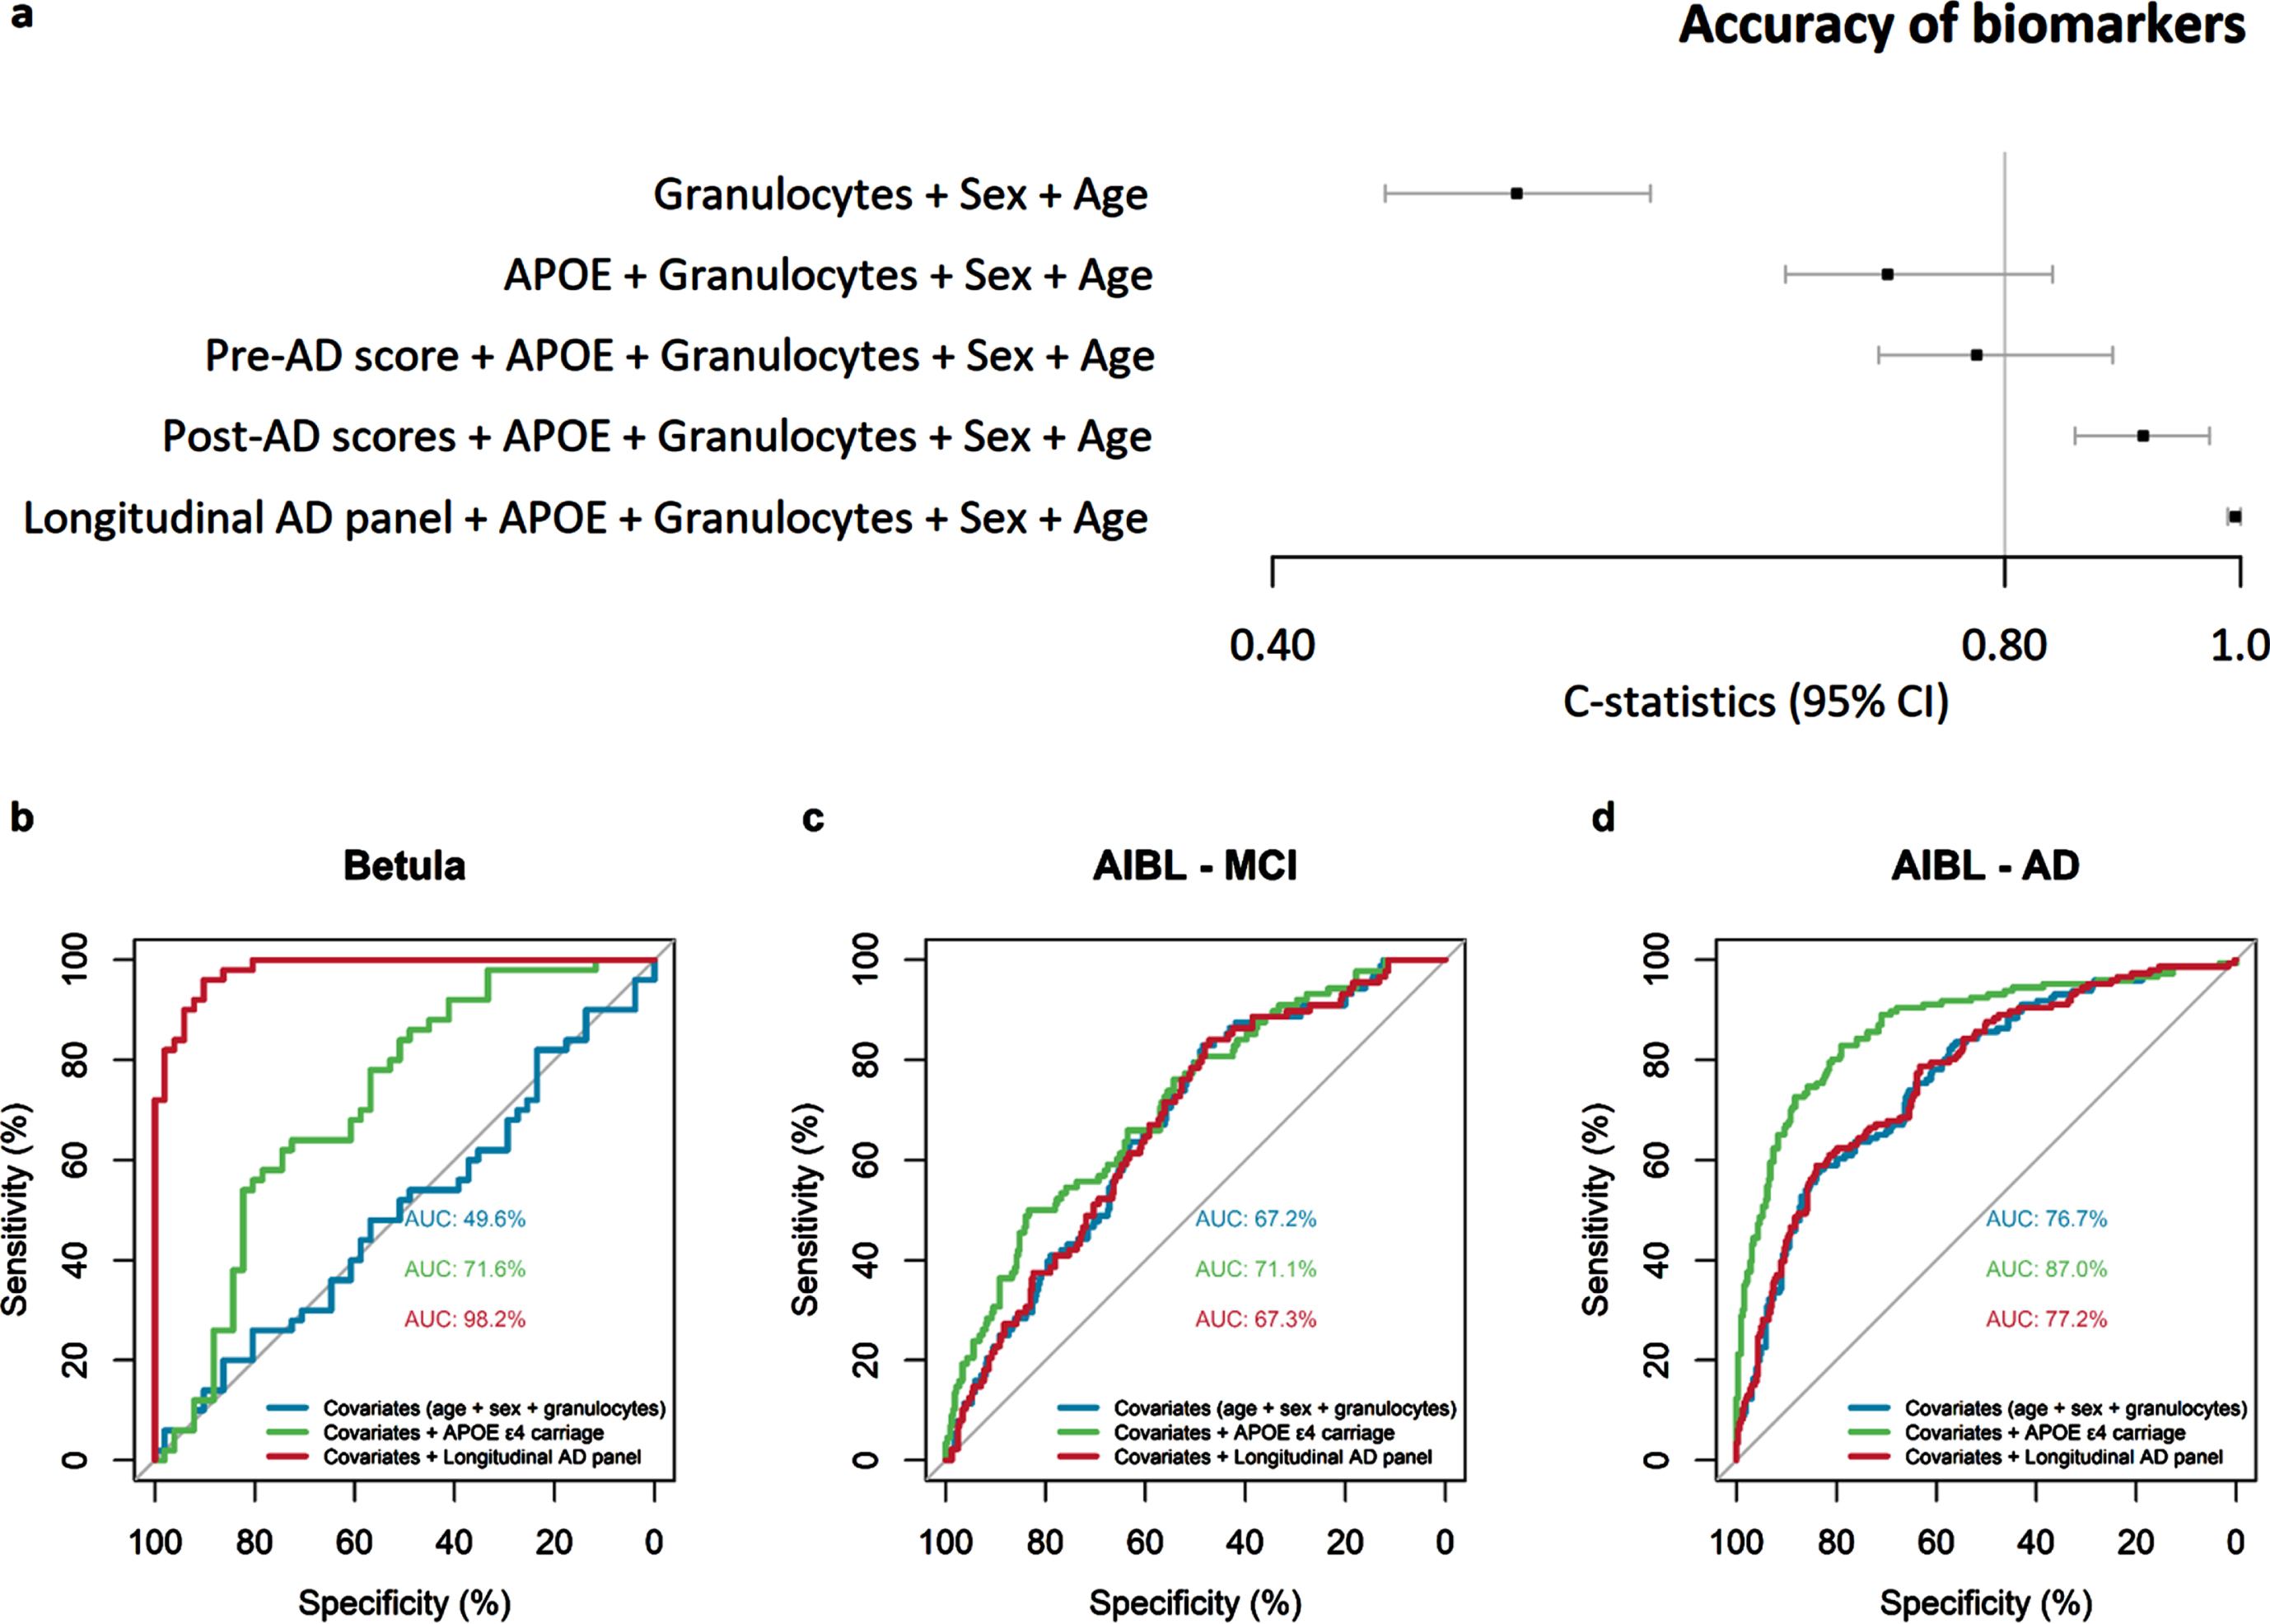 Accuracy of novel DNAm biomarkers in the Betula and The Australian Imaging, Biomarker & Lifestyle of Ageing (AIBL) samples. The forest plot shows the discriminatory accuracy (C-statistics) of the logistic regression models comparing AD cases versus matched-controls when including the biomarkers apolipoprotein E (APOE) ɛ4 allele carriage, pre-AD score, post-AD scores and longitudinal AD panel in the Betula baseline subsample, on average 8 years before diagnosis (a). Area under the receiver operating characteristic (ROC) curves (AUC) plots of logistic regression models comparing the accuracy of APOE ɛ4 allele carriage with the longitudinal AD panel in the Betula at the baseline time-point of each participant, on average 8 years before onset (b), AIBL MCI cases (c), and AIBL AD cases (d). Models were adjusted by the covariates chronological age, sex, and granulocyte proportion. APOE ɛ4 carriage, and sex is a binary term; the novel DNAm biomarkers, age and granulocyte proportion are continuous and z-transformed. Binary terms as AD, are interpreted as the difference between AD and control when all the other covariates are 0. Z-transformed terms are interpreted as the effect of one standard deviation’s increase in the odds ratio.